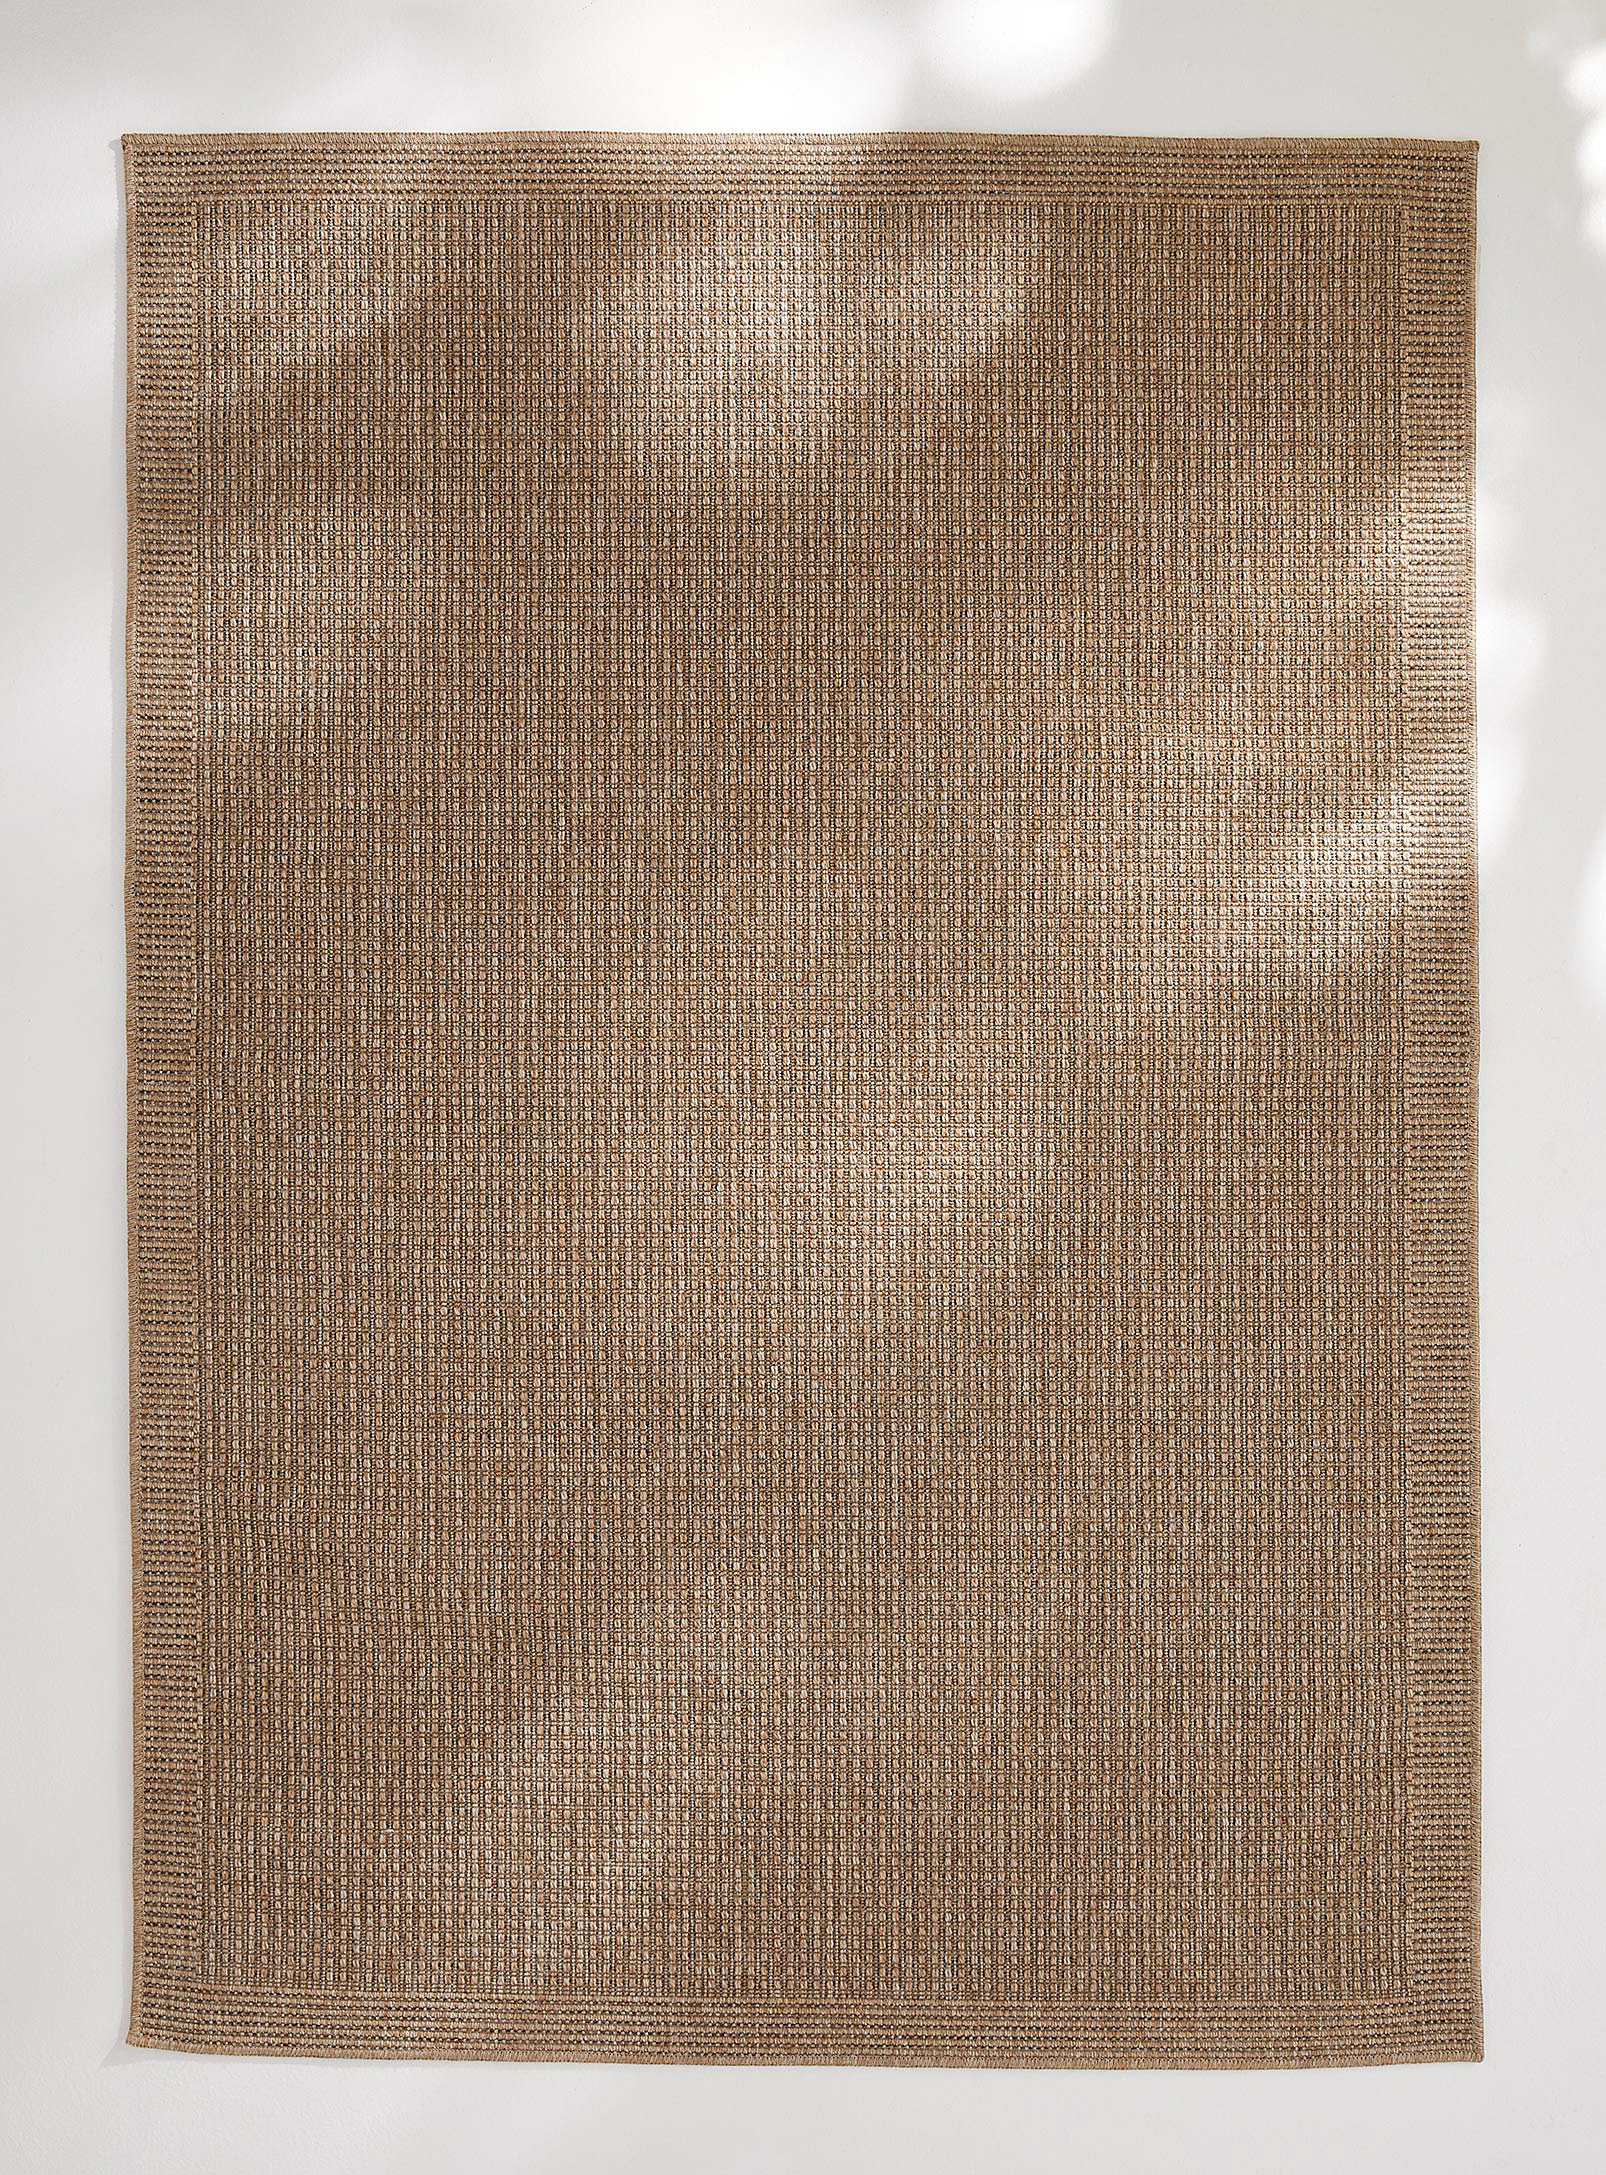 Simons Maison Jute-like Indoor-outdoor Rug See Available Sizes In Cream Beige